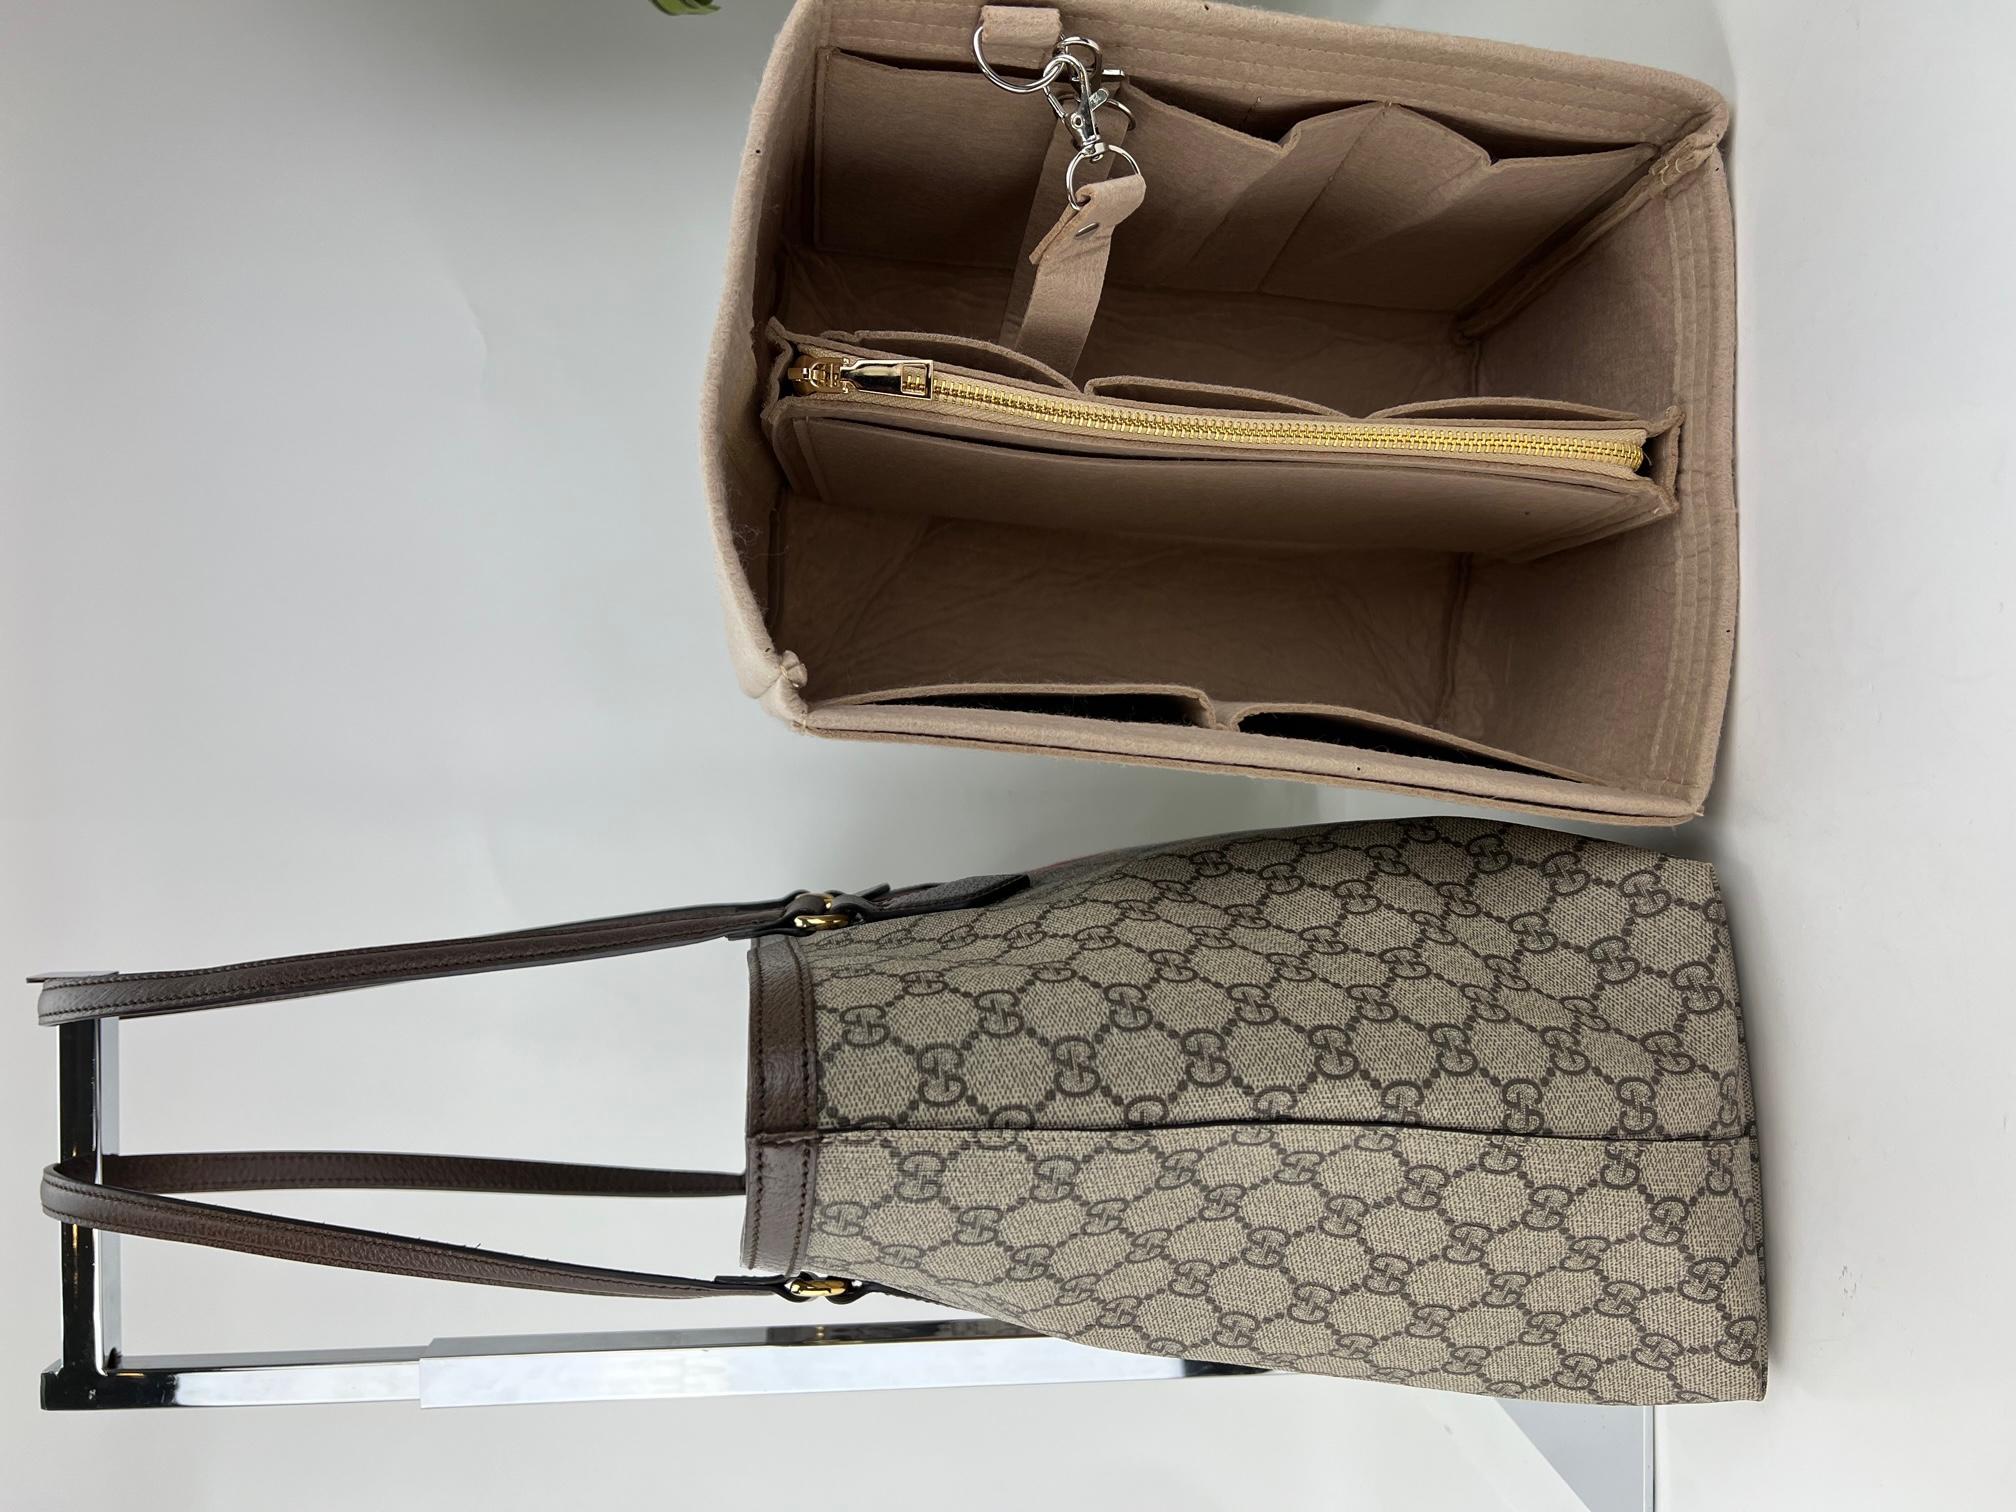 Pre-Owned  100% Authentic
Gucci Ophidia GG medium tote With
Added Insert to help Organize and
Keep Shape
RATING: A...excellent, near mint, only
slight signs of wear
MATERIAL: Beige/ebony GG Supreme
canvas, brown leather trim
HANDLE: brown double